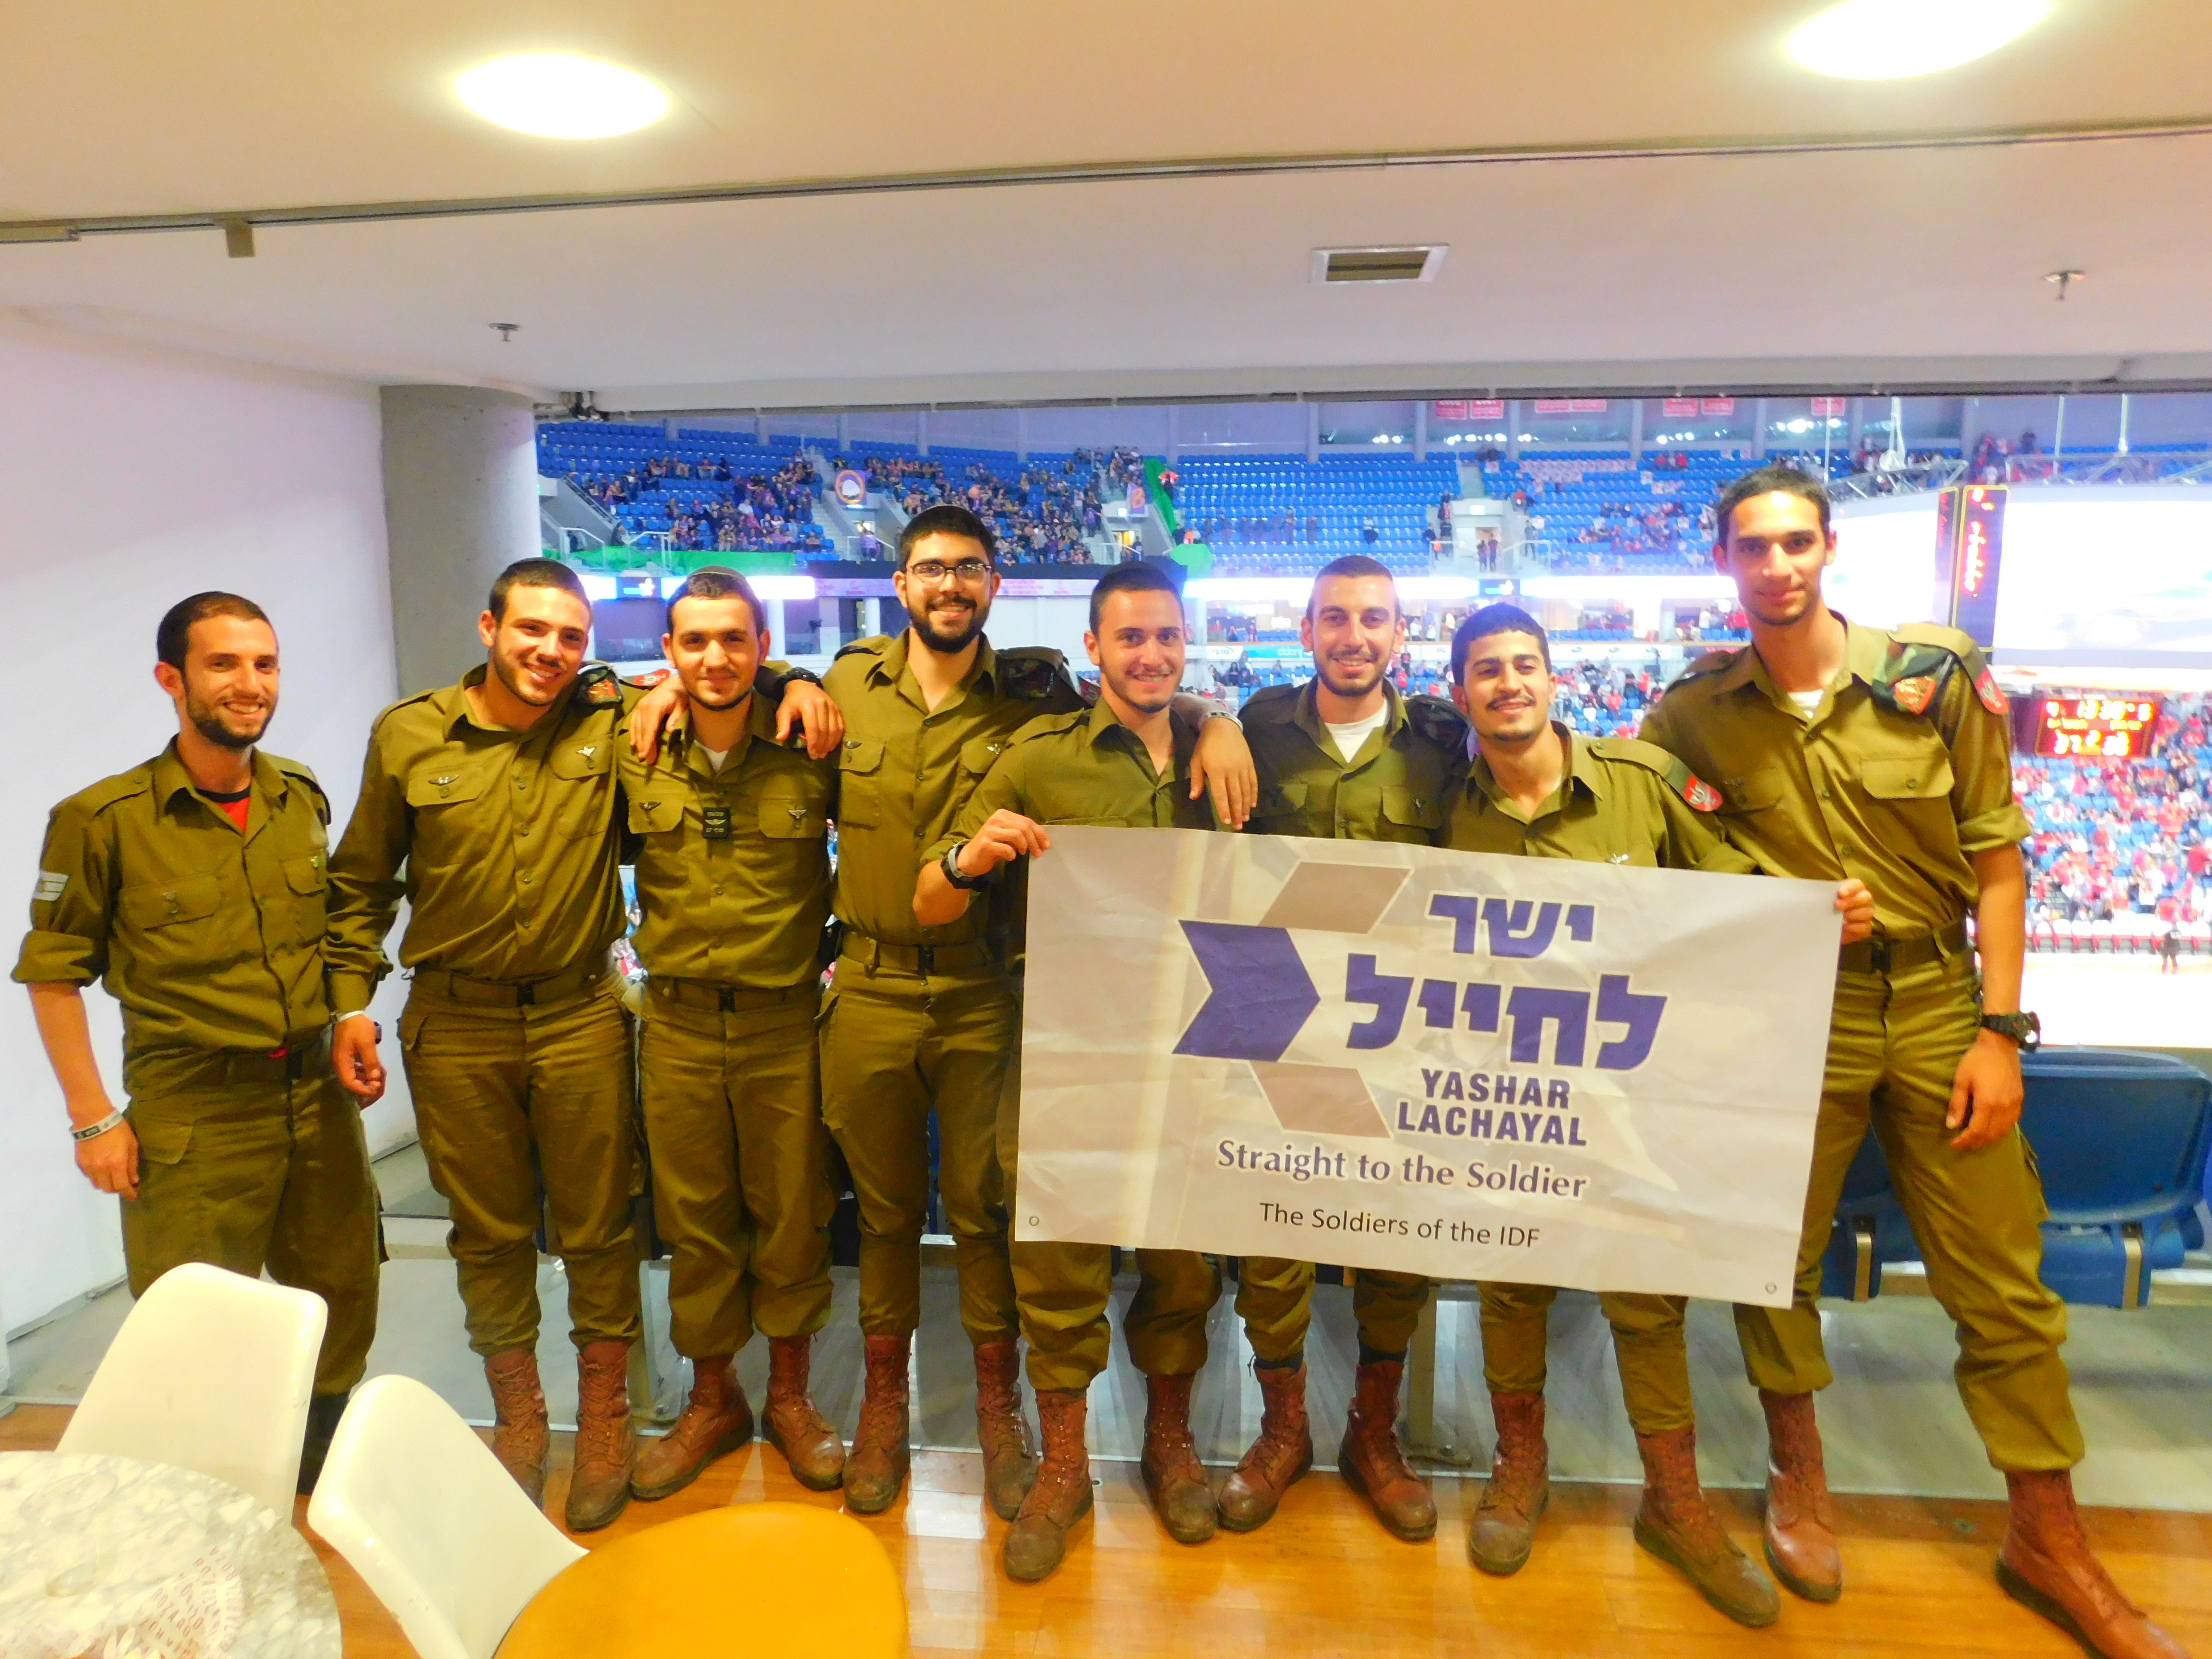 A group of IDF soldiers pose in the VIP box at a sport stadium.